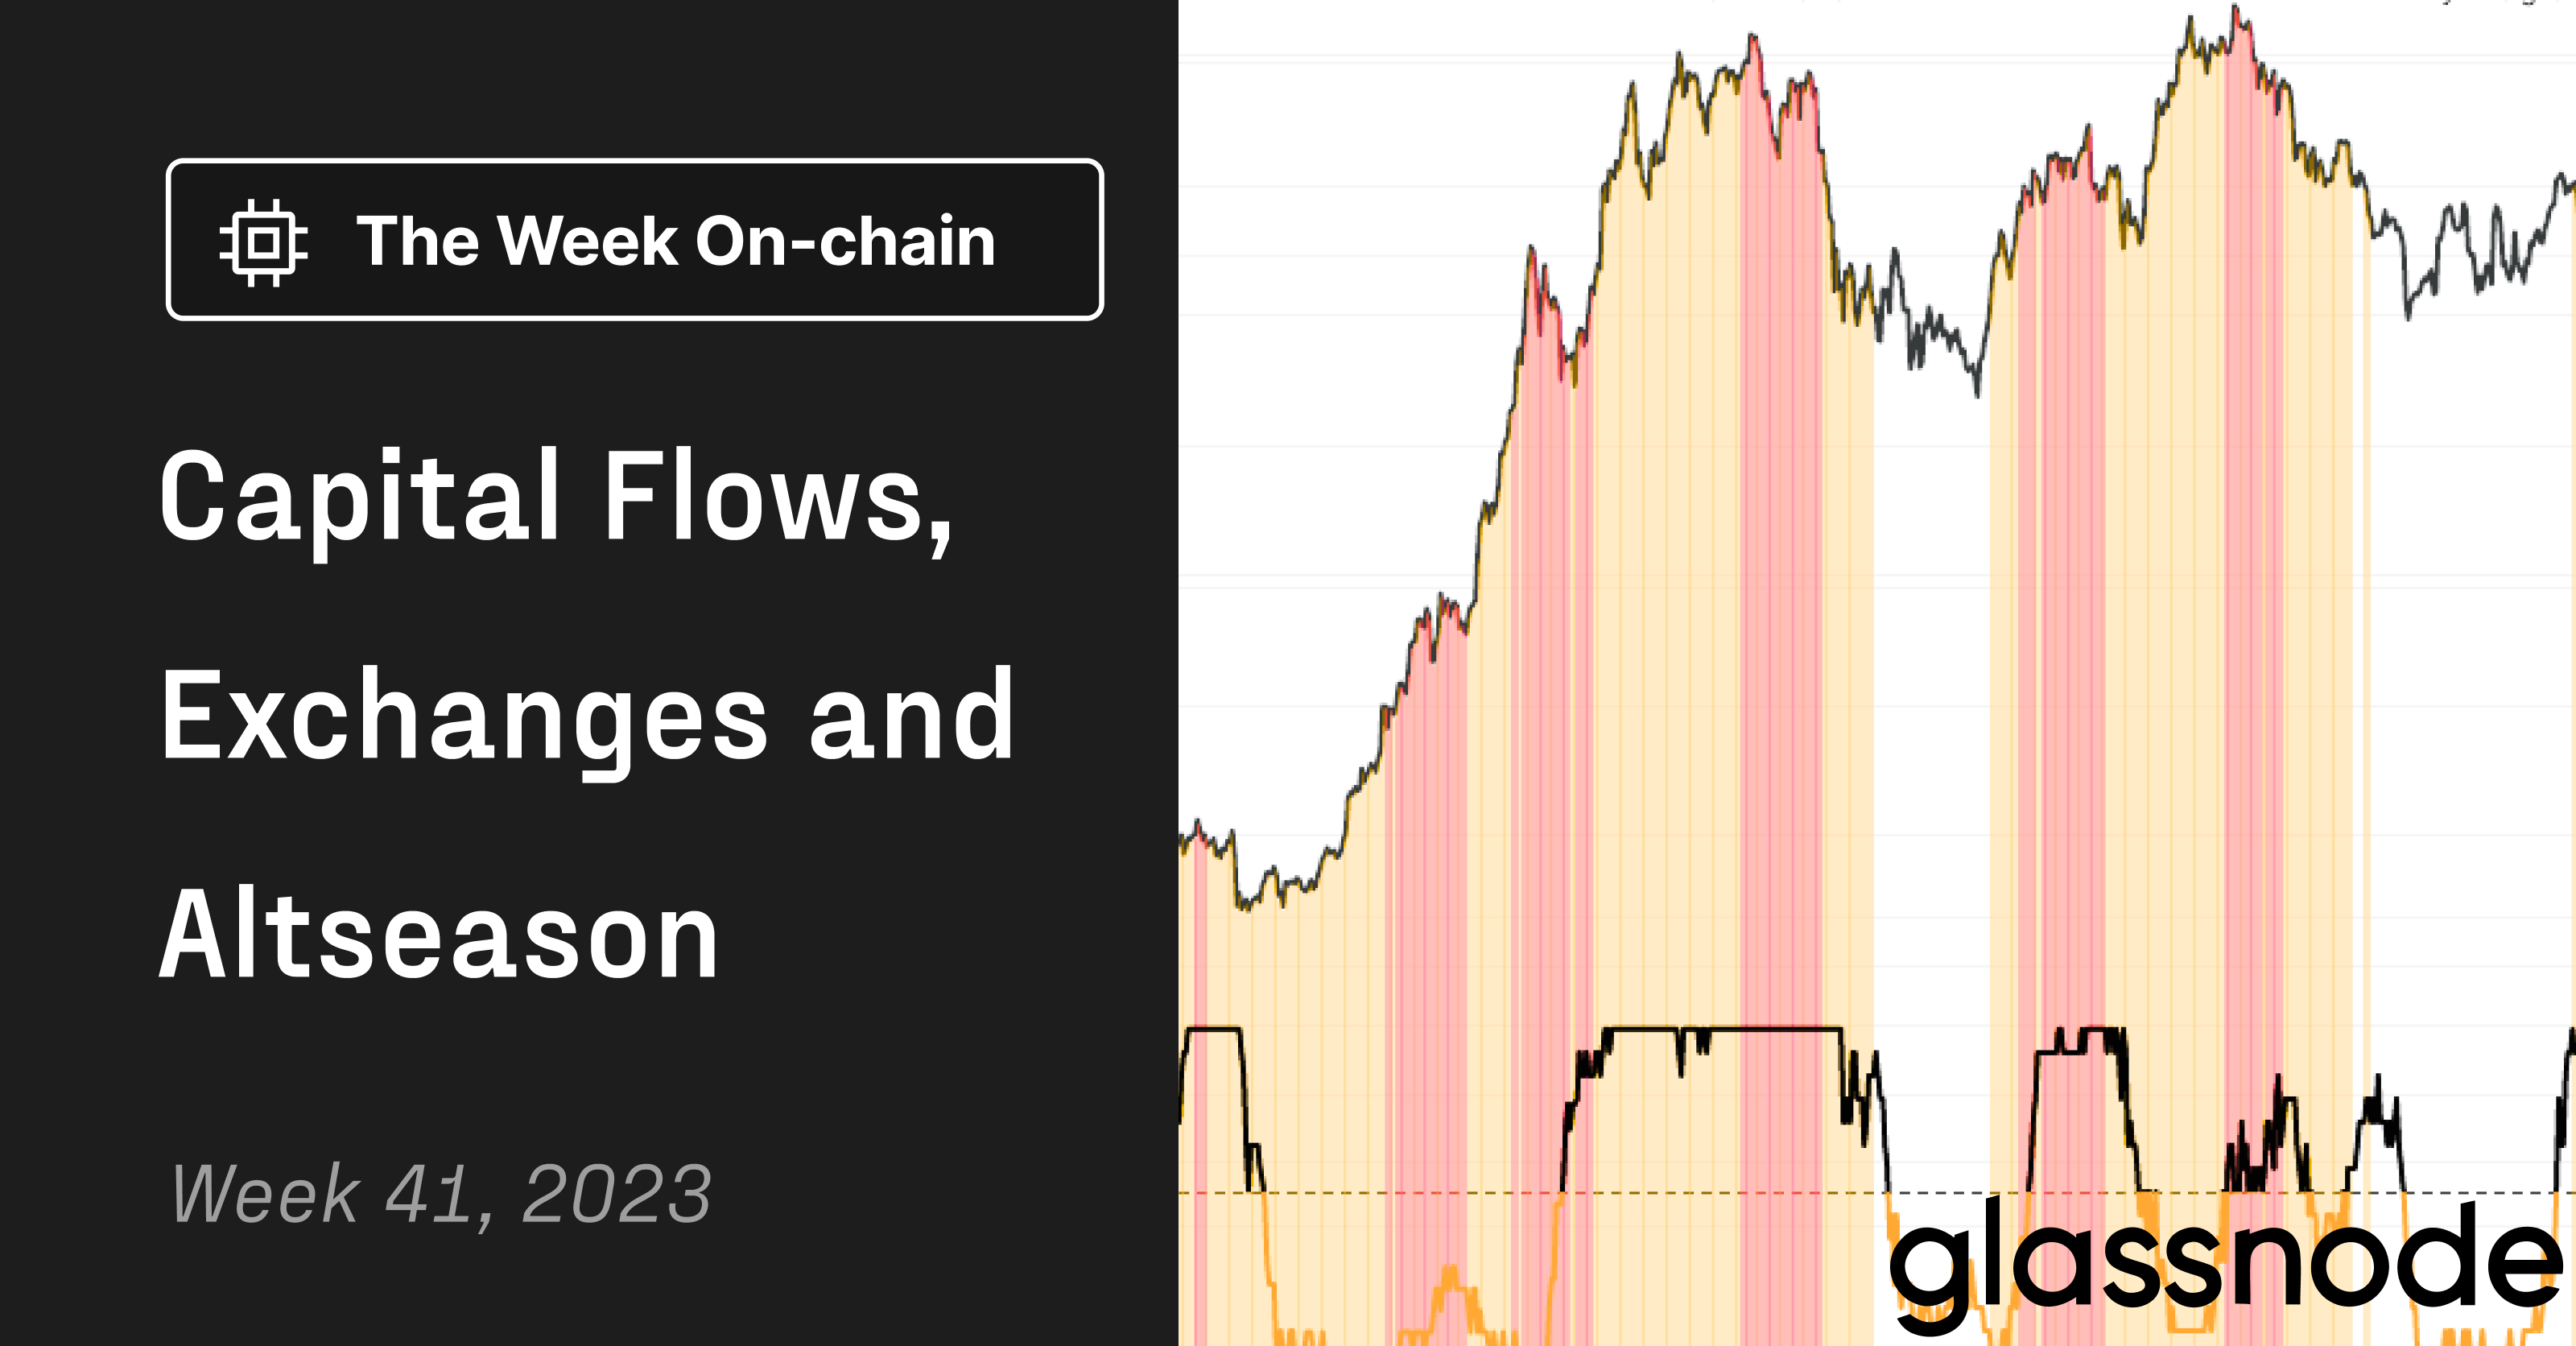 Capital Flows, Exchanges and Altseason